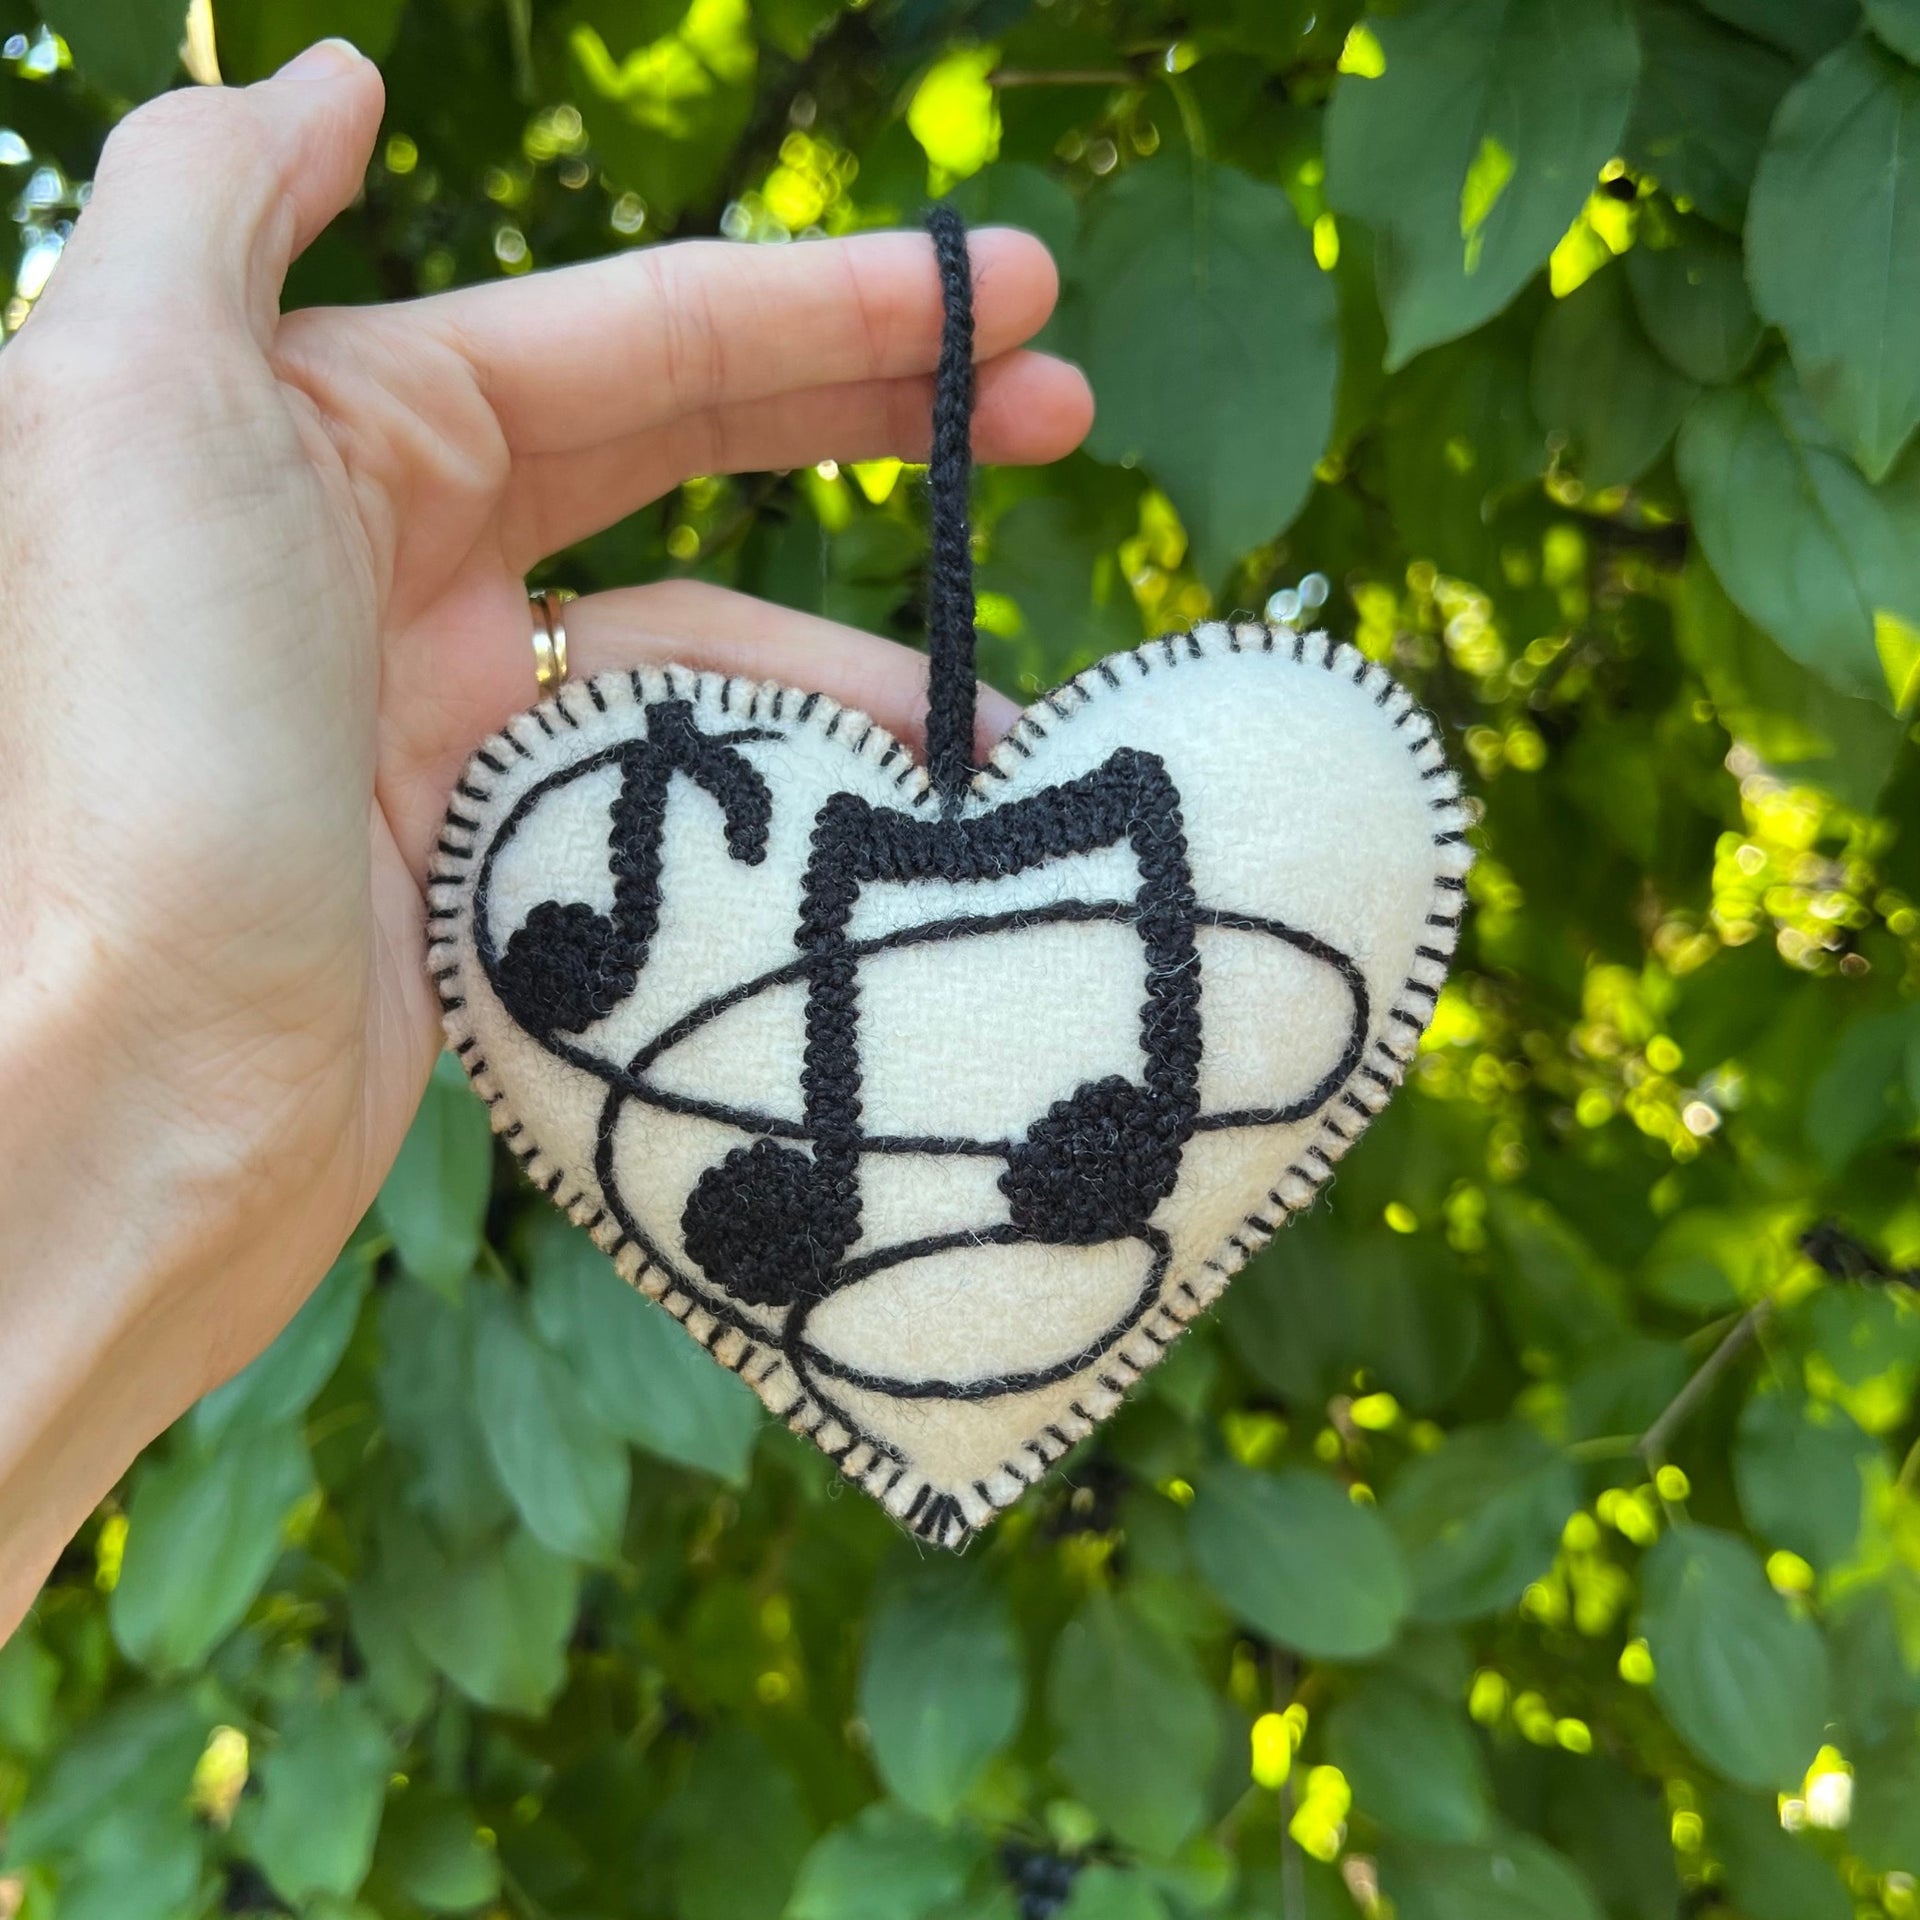 Musical Heart Christmas Ornament being held outside